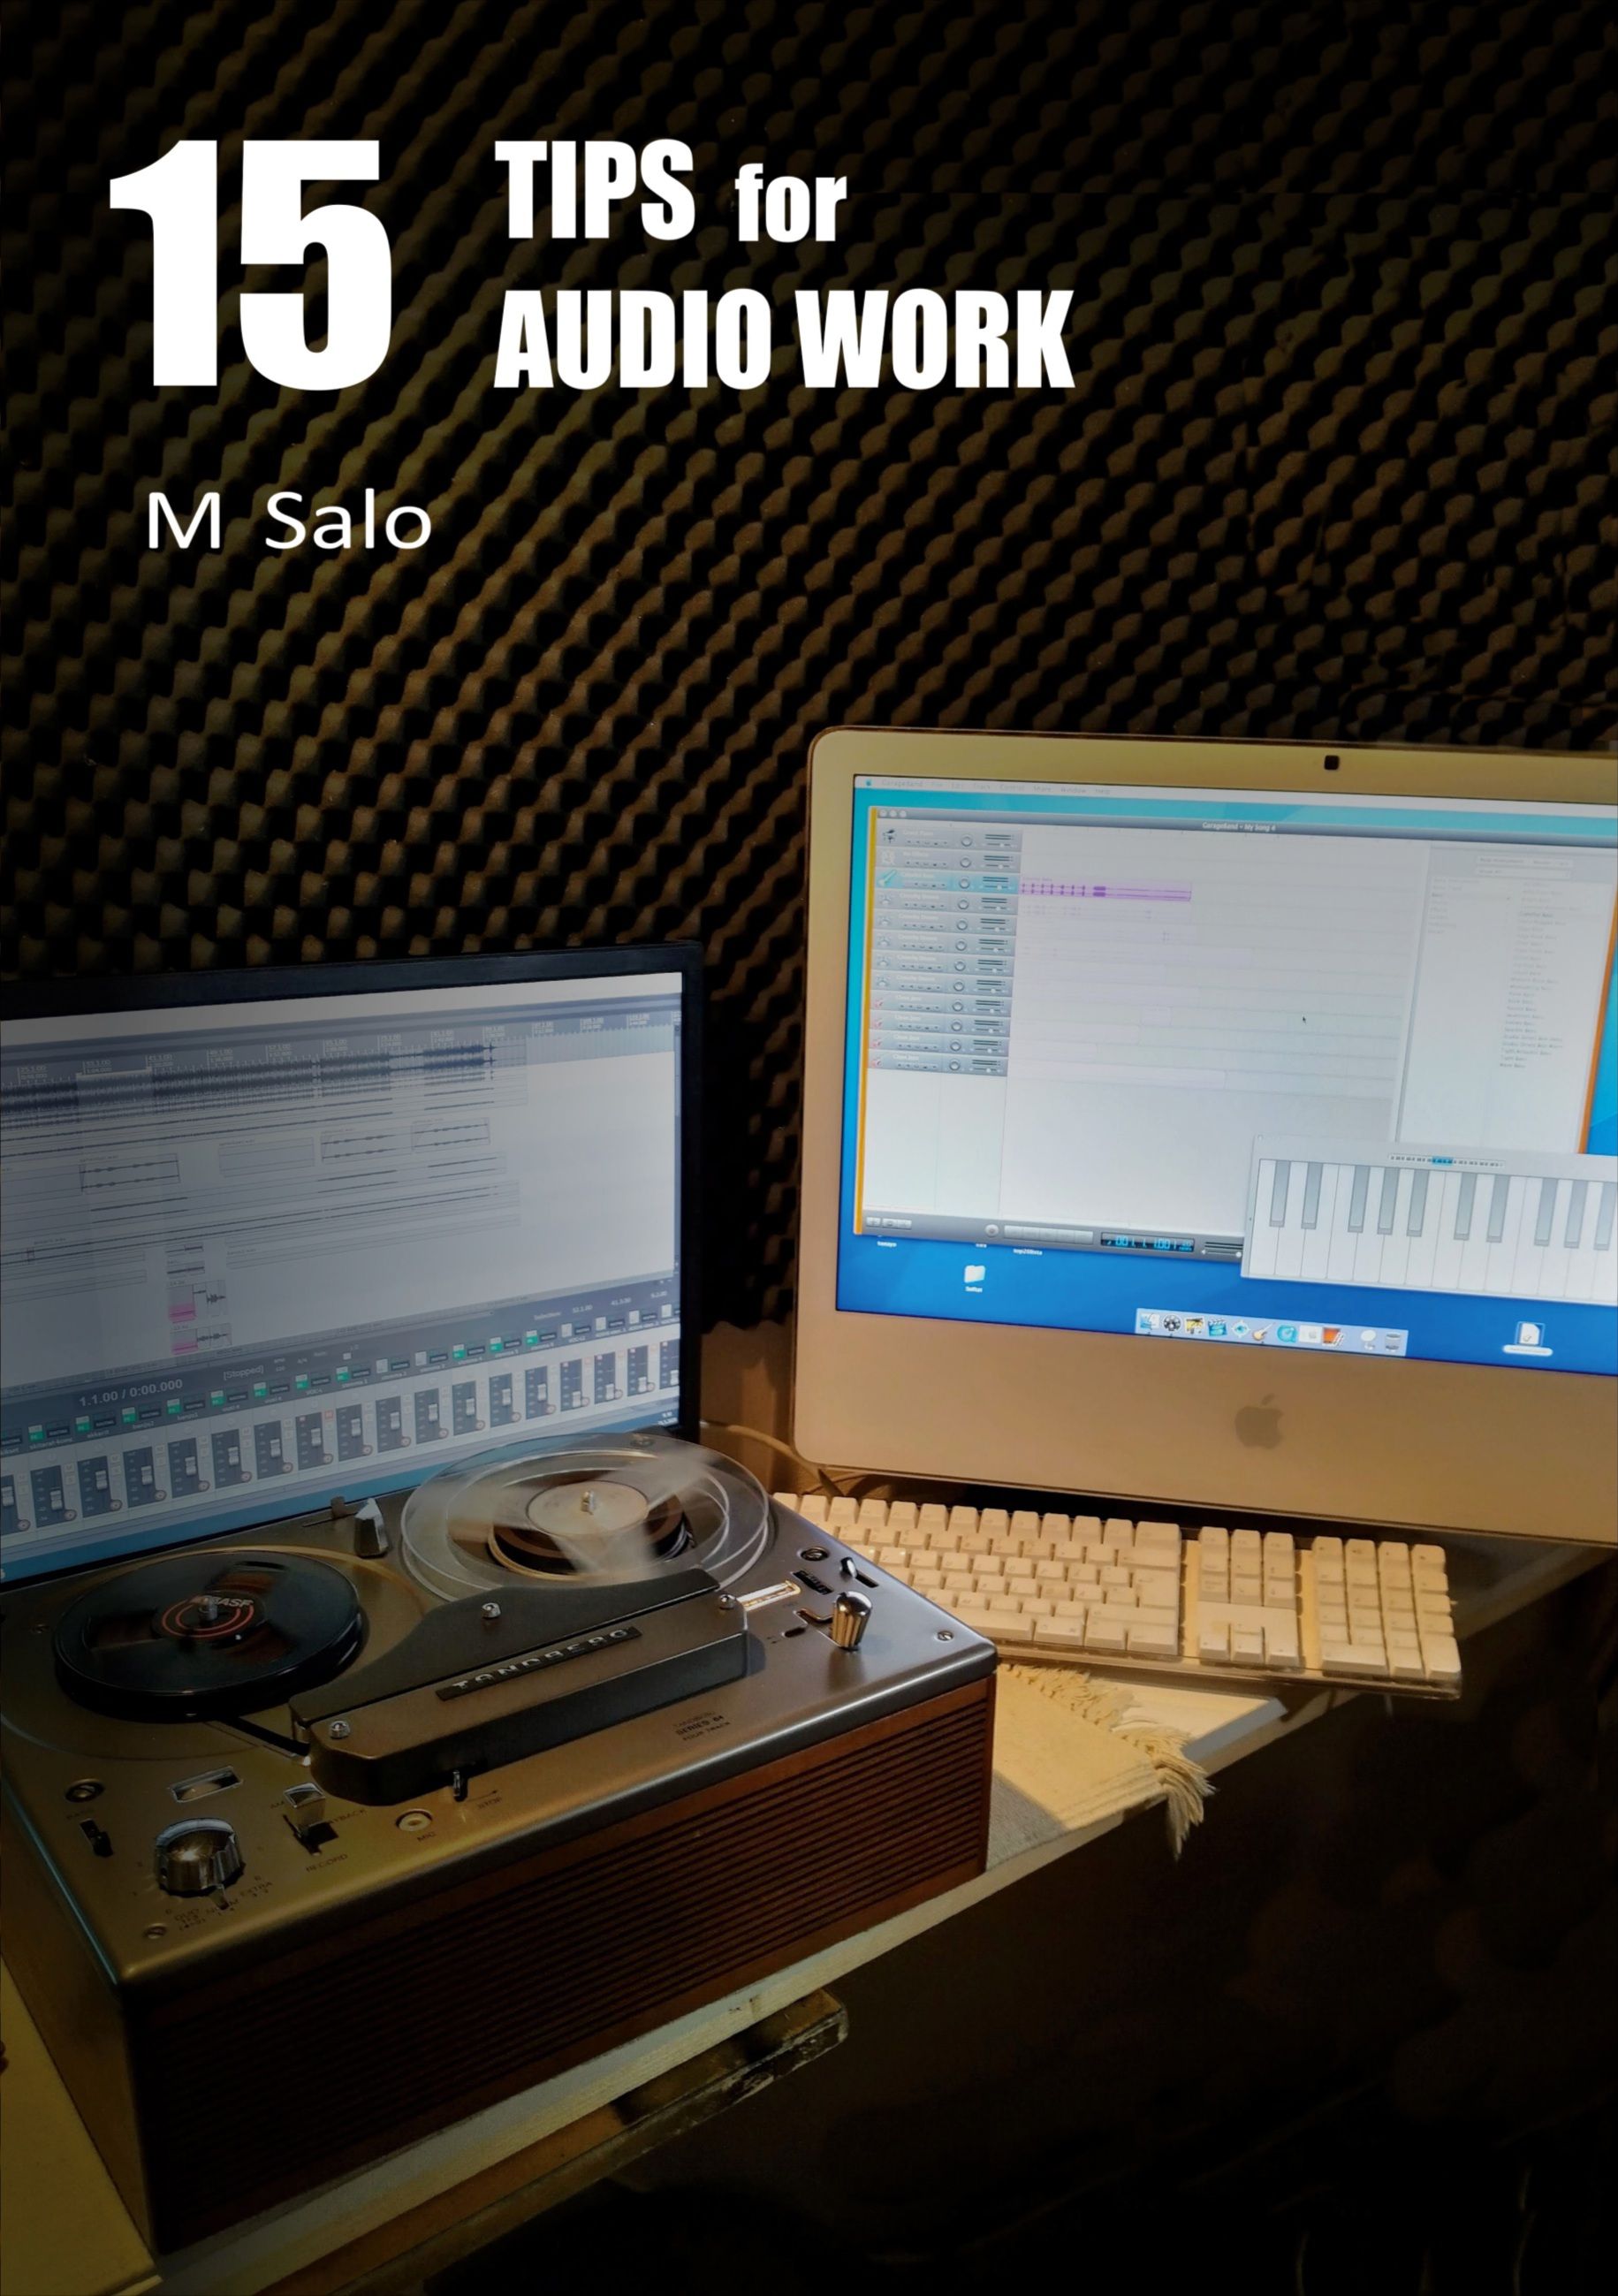 M Salo : 15 Tips for Audio Work